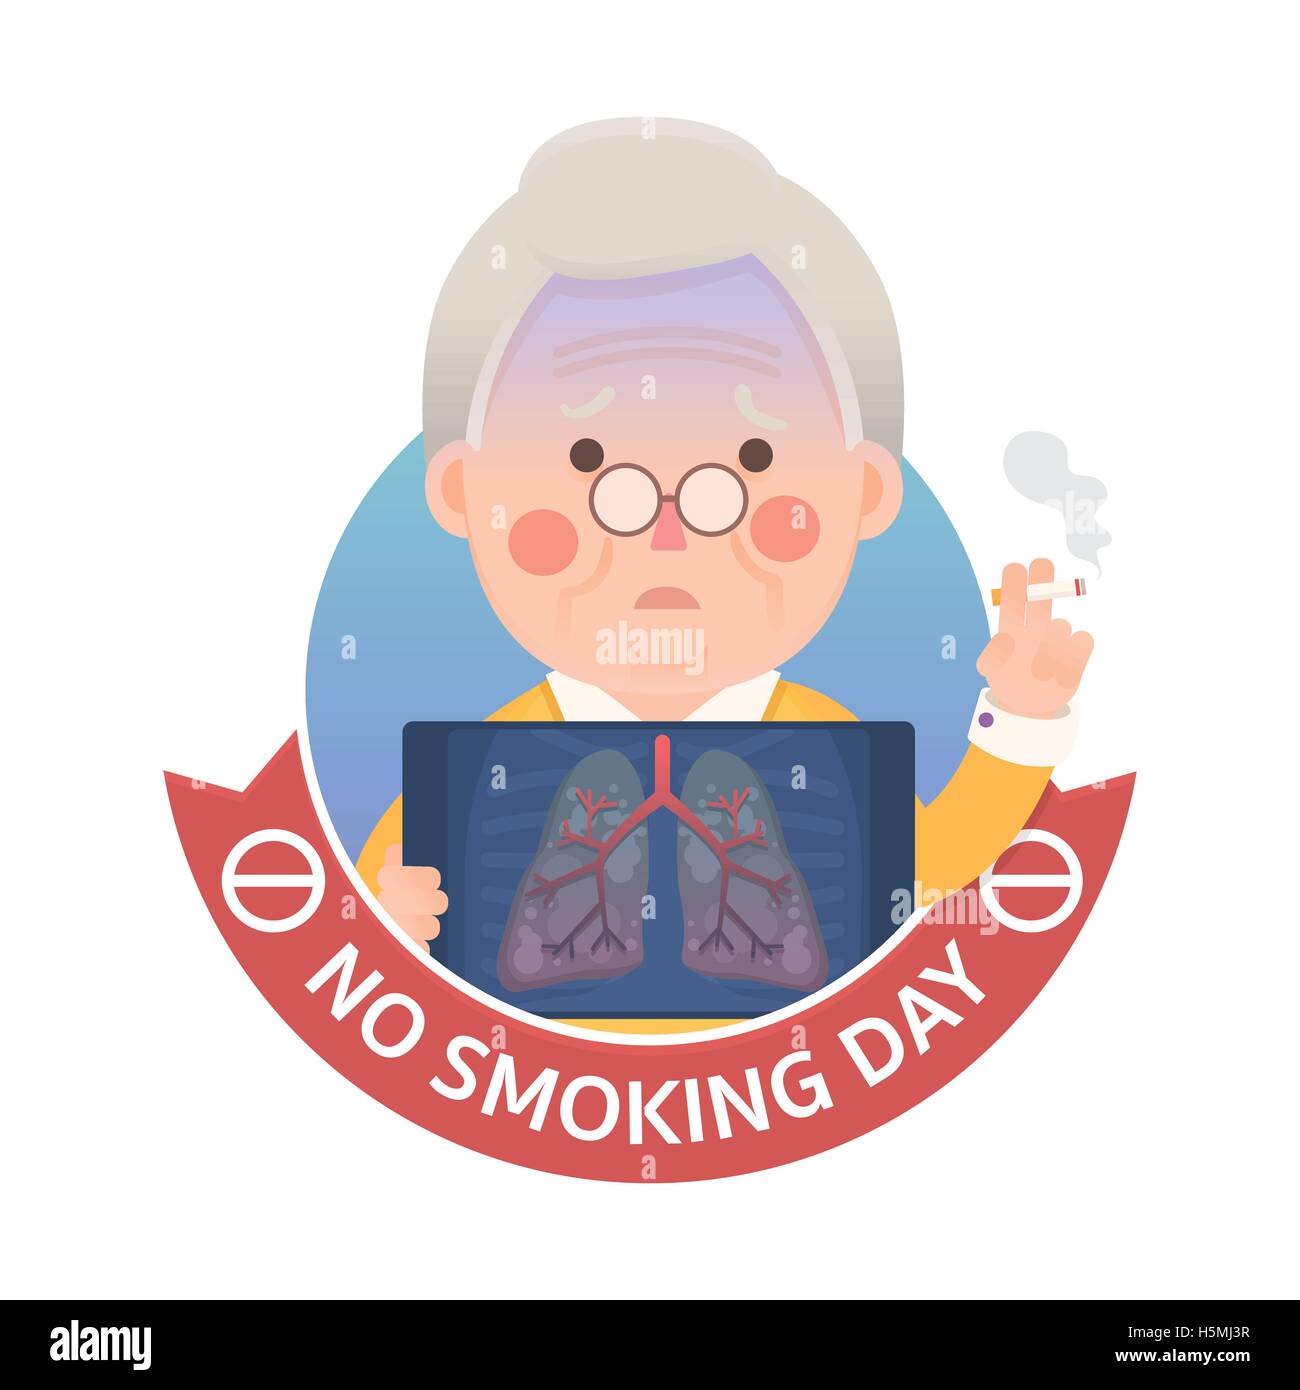 Vector Illustration of Old Man Smoking Cigarette Holding X-ray Image Show Lung Pulmonary Emphysema Problem With No Smoking sign Stock Vector